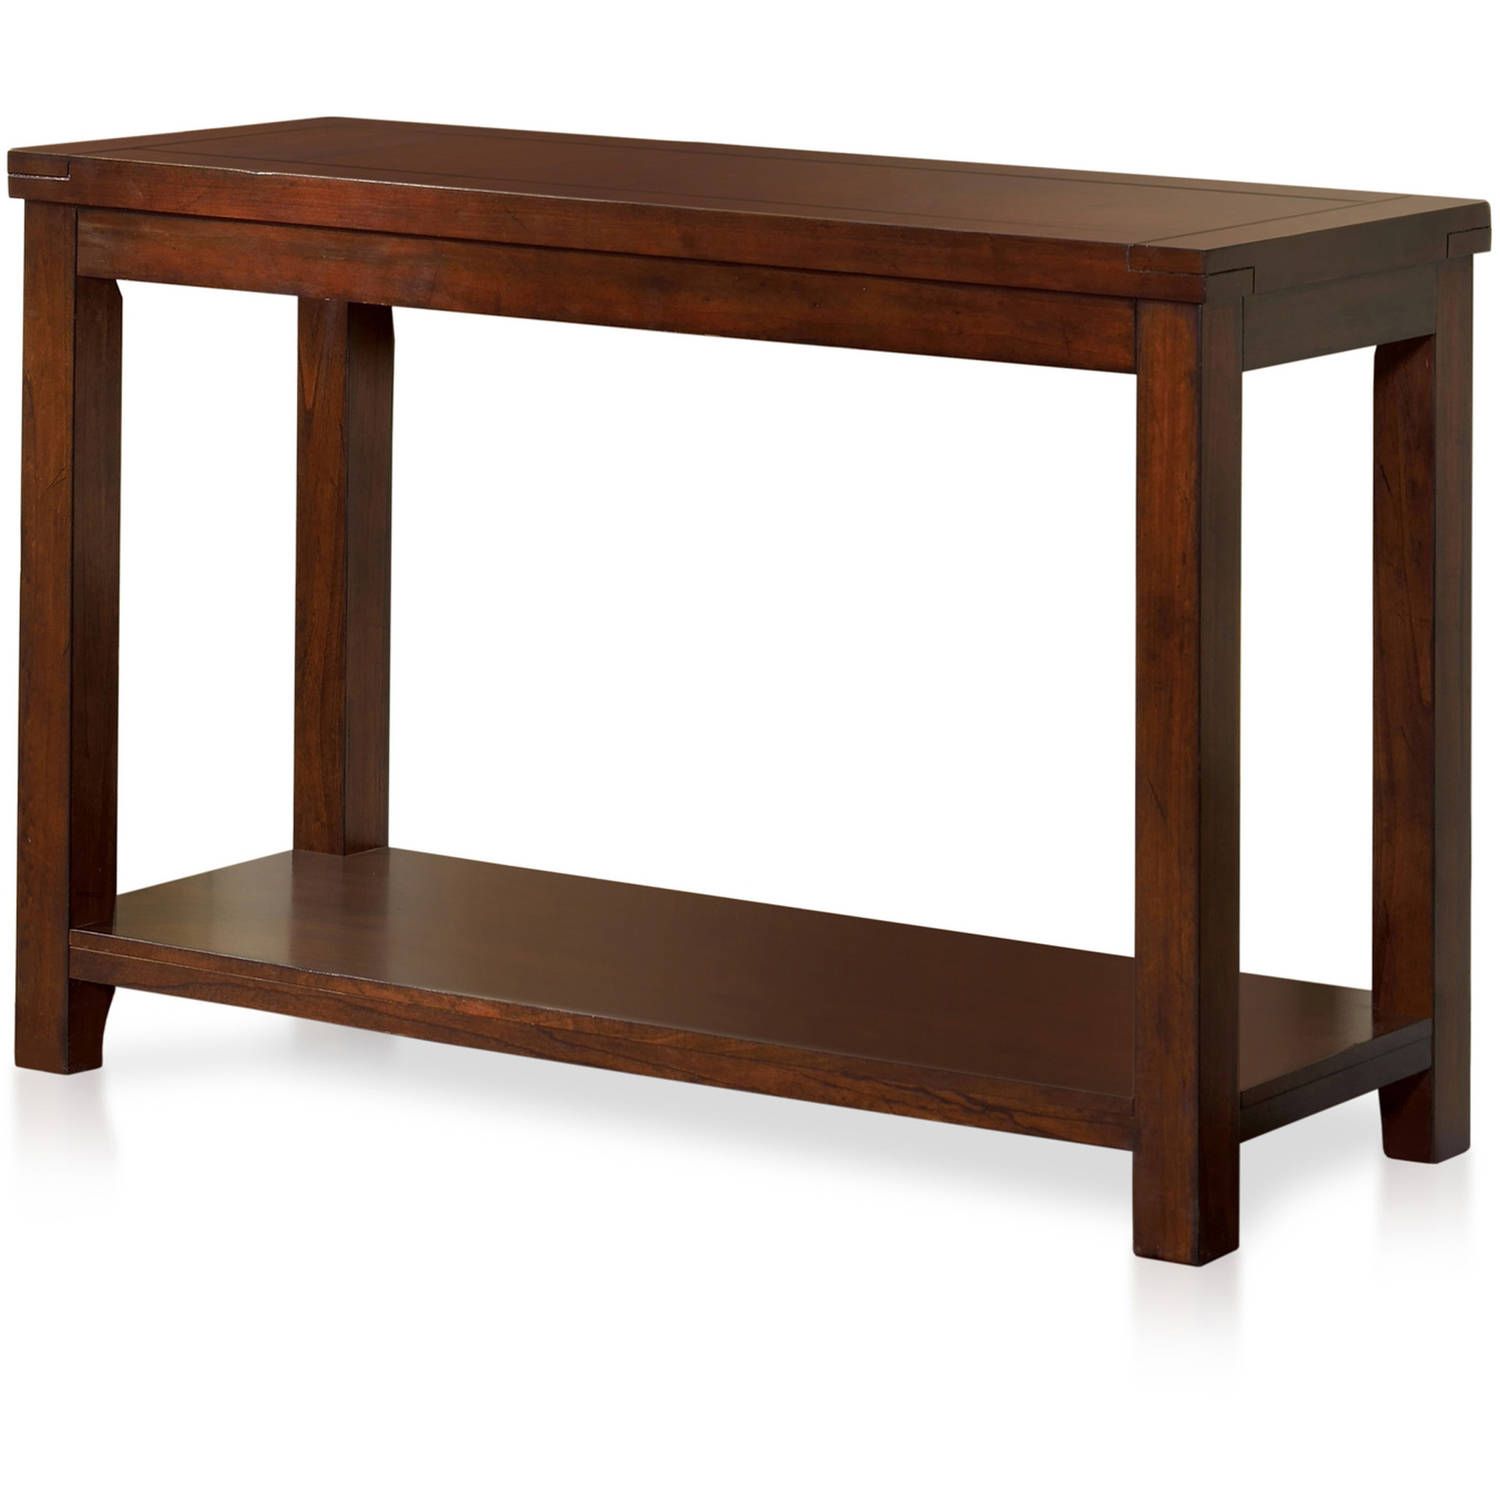 Furniture Of America Pivett Transitional Sofa Table, Dark Inside Heartwood Cherry Wood Console Tables (Photo 15 of 20)